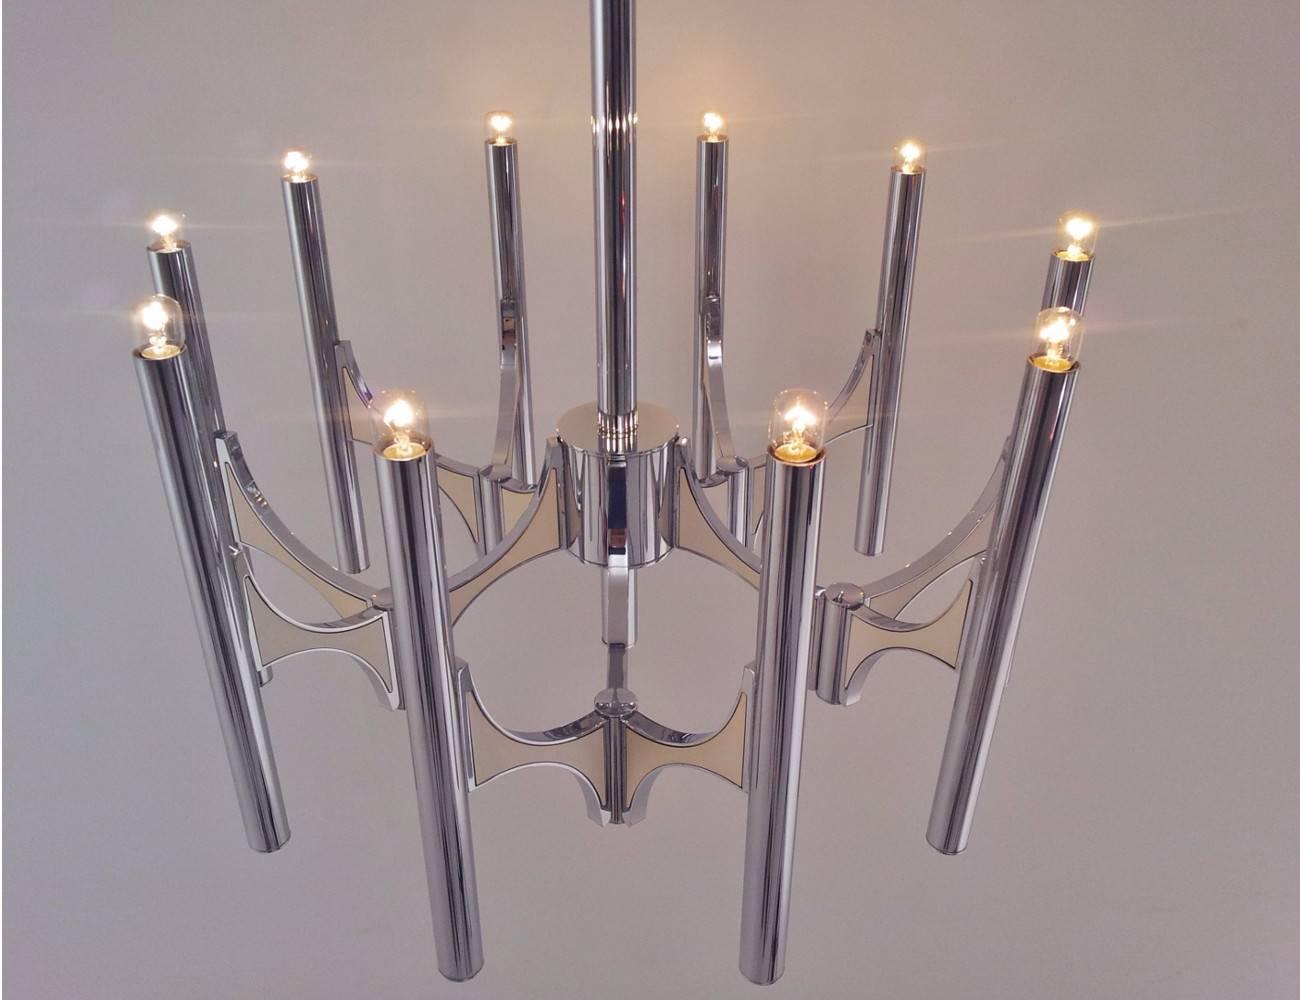 Magistrale and iconic suspension of Gaetano Sciolari for Lightolier in chromed metal and sheets of white metal composed of five branches, themselves divided into two branches, ten fires.
An exceptional piece!